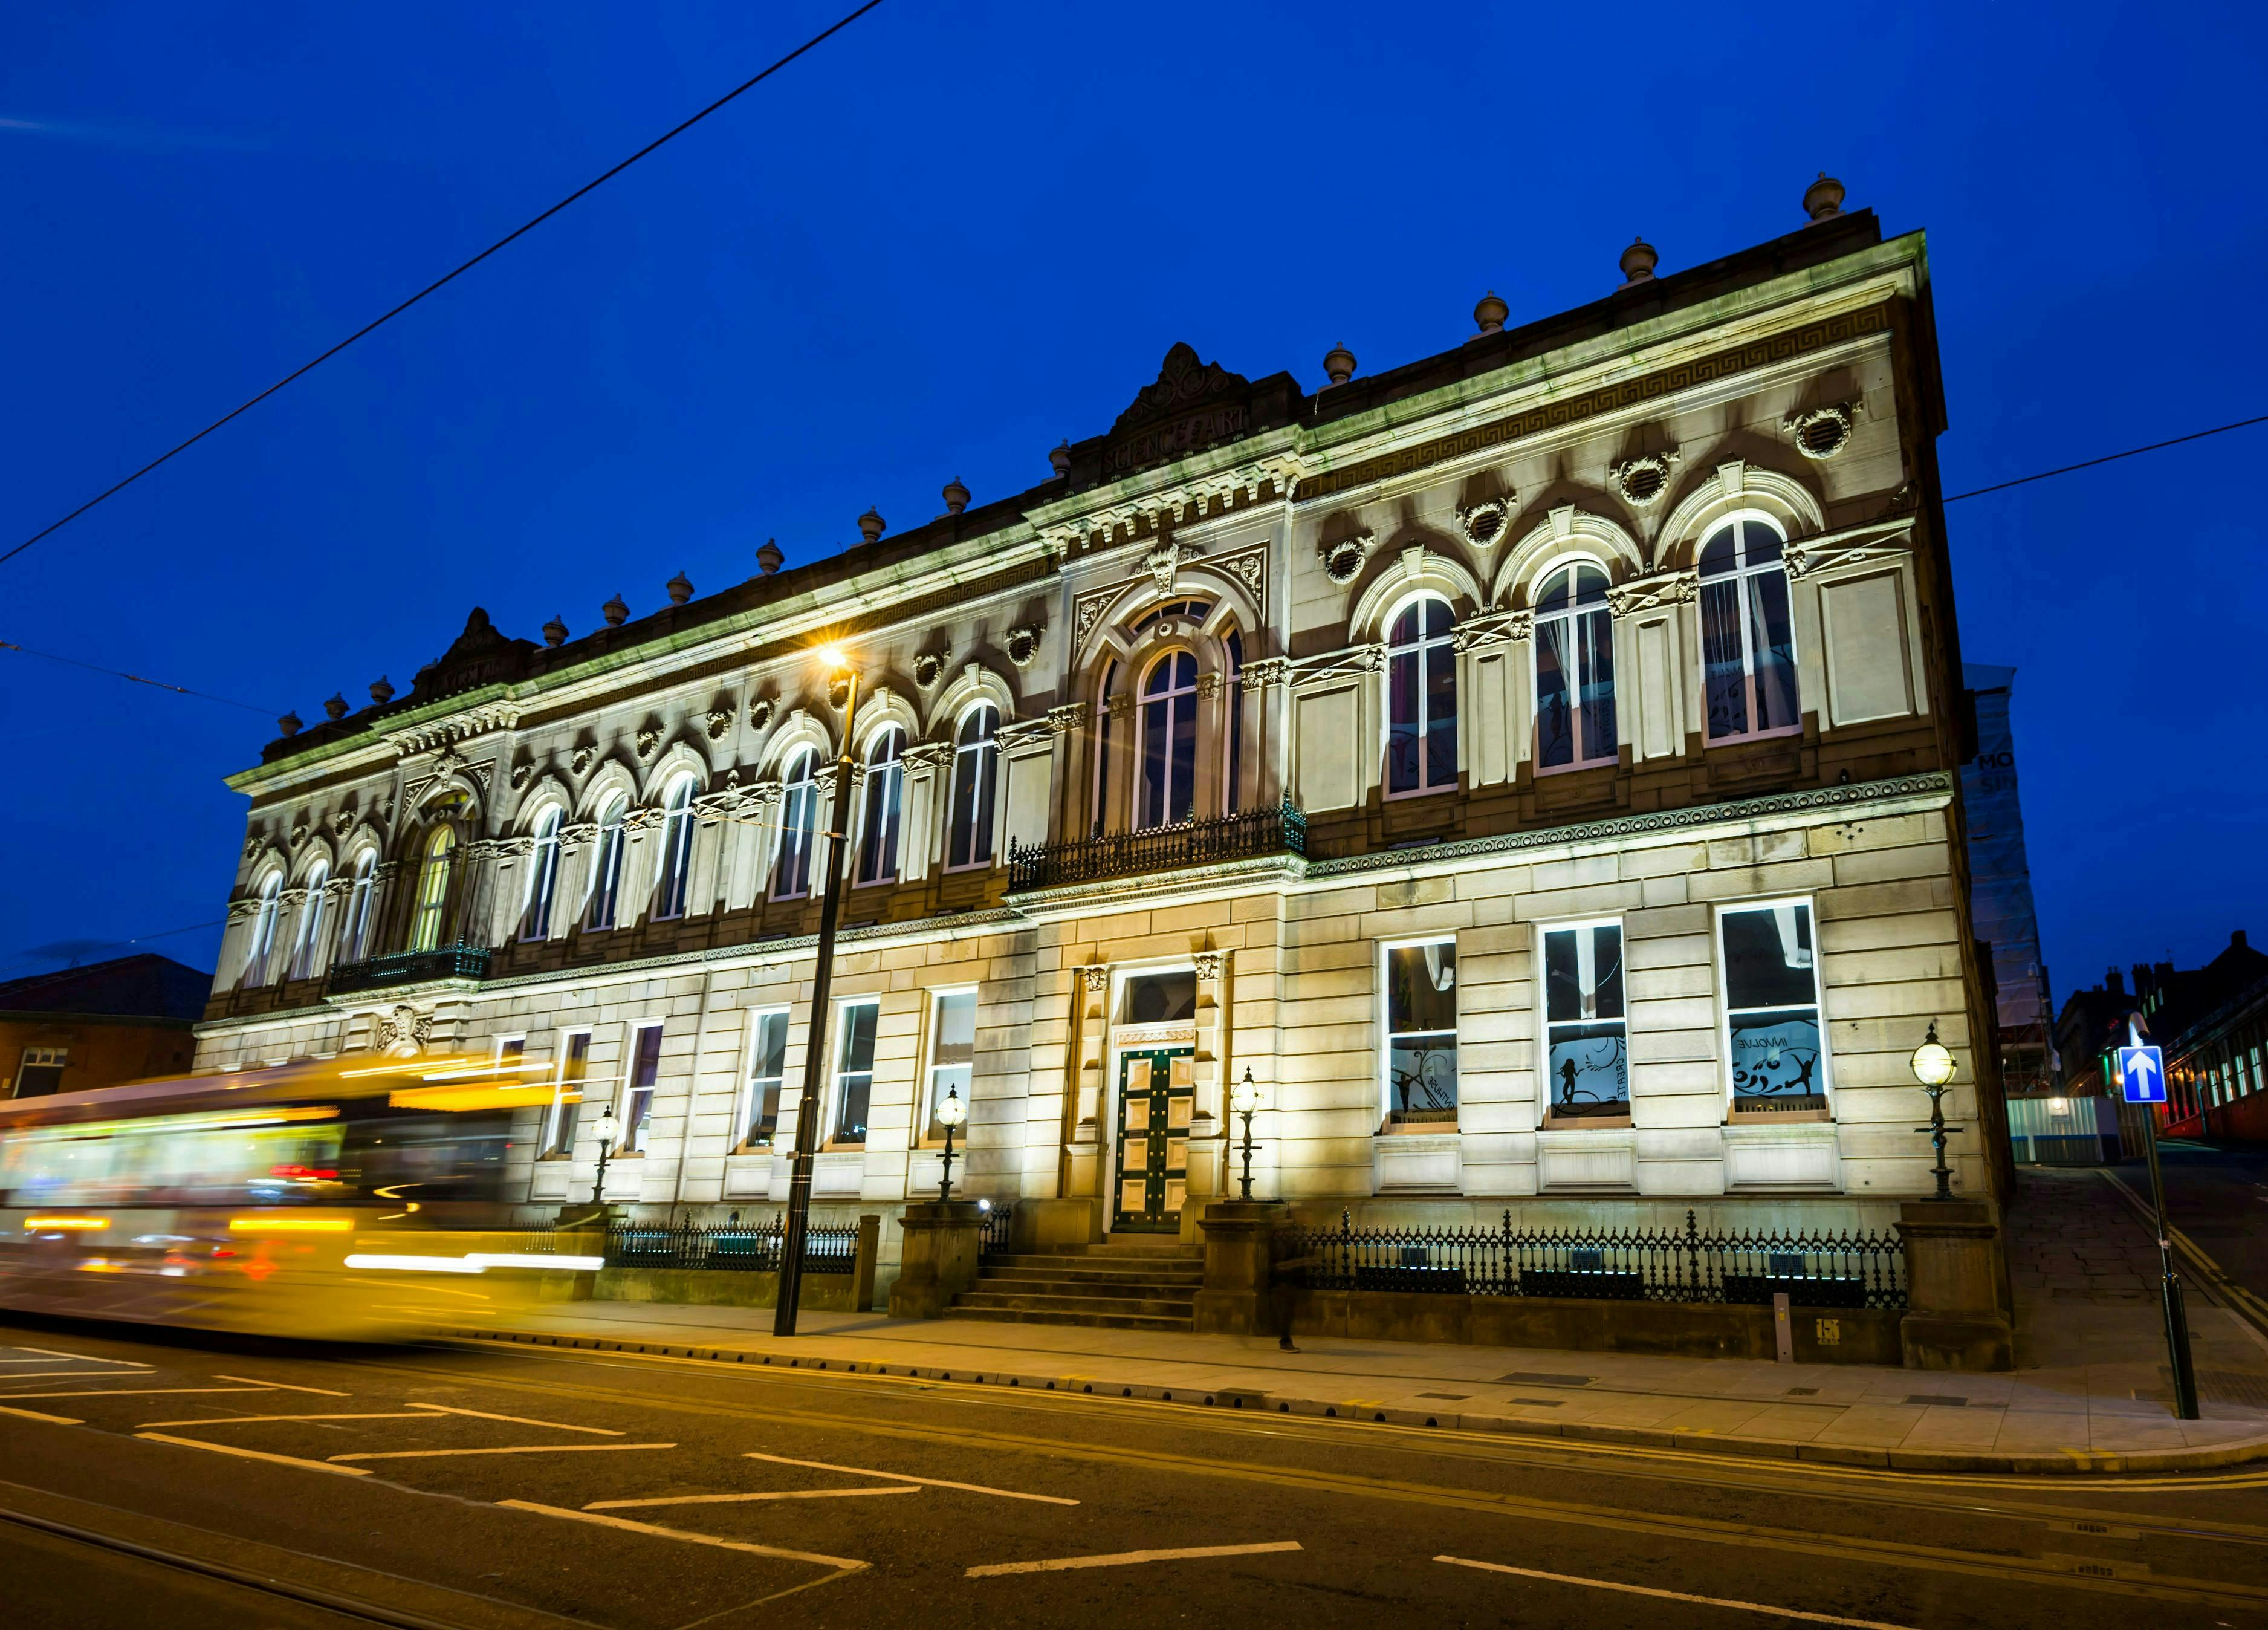 Nighttime image of a building with a tram passing in front of it.